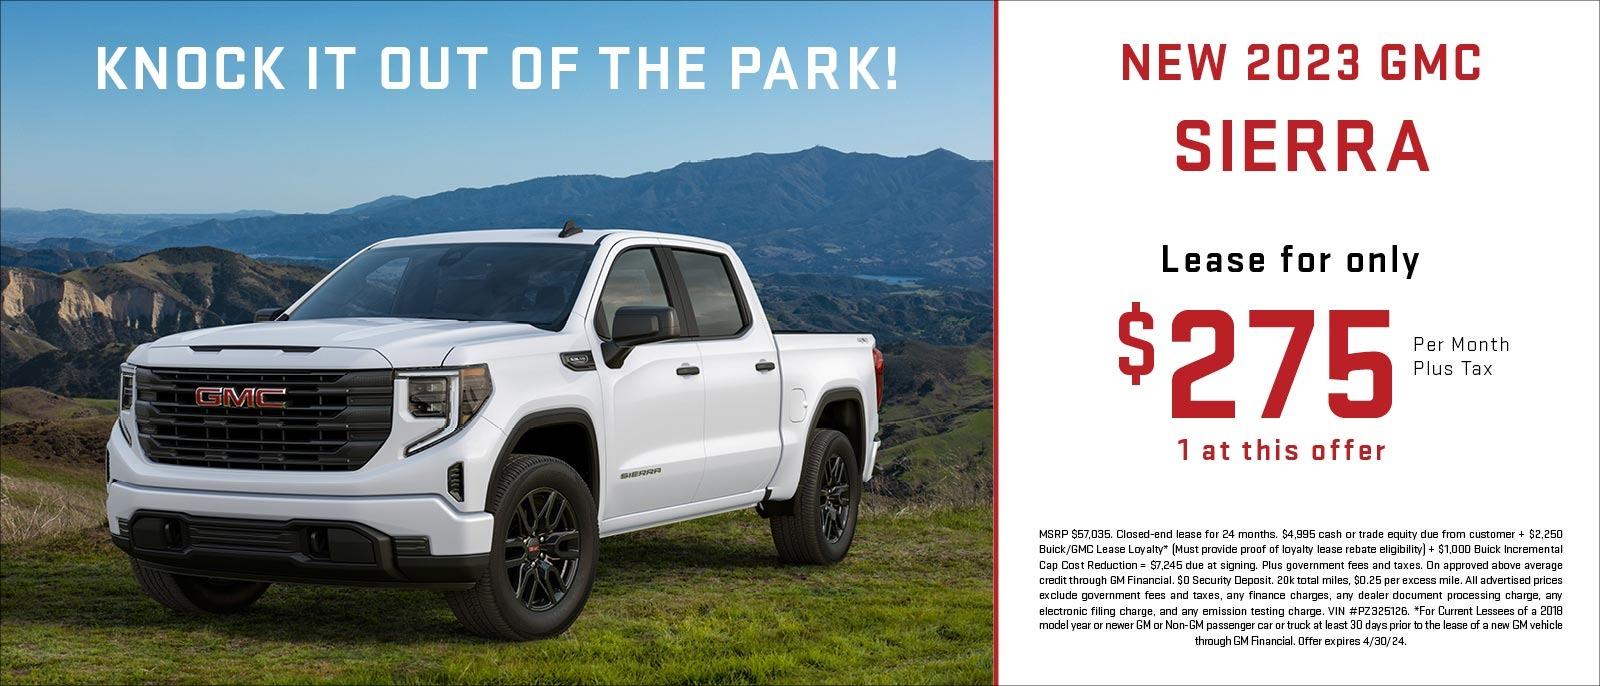 NEW 2023 GMC SIERRA Lease for only $275 Per Month Plus Tax 1 at this offer